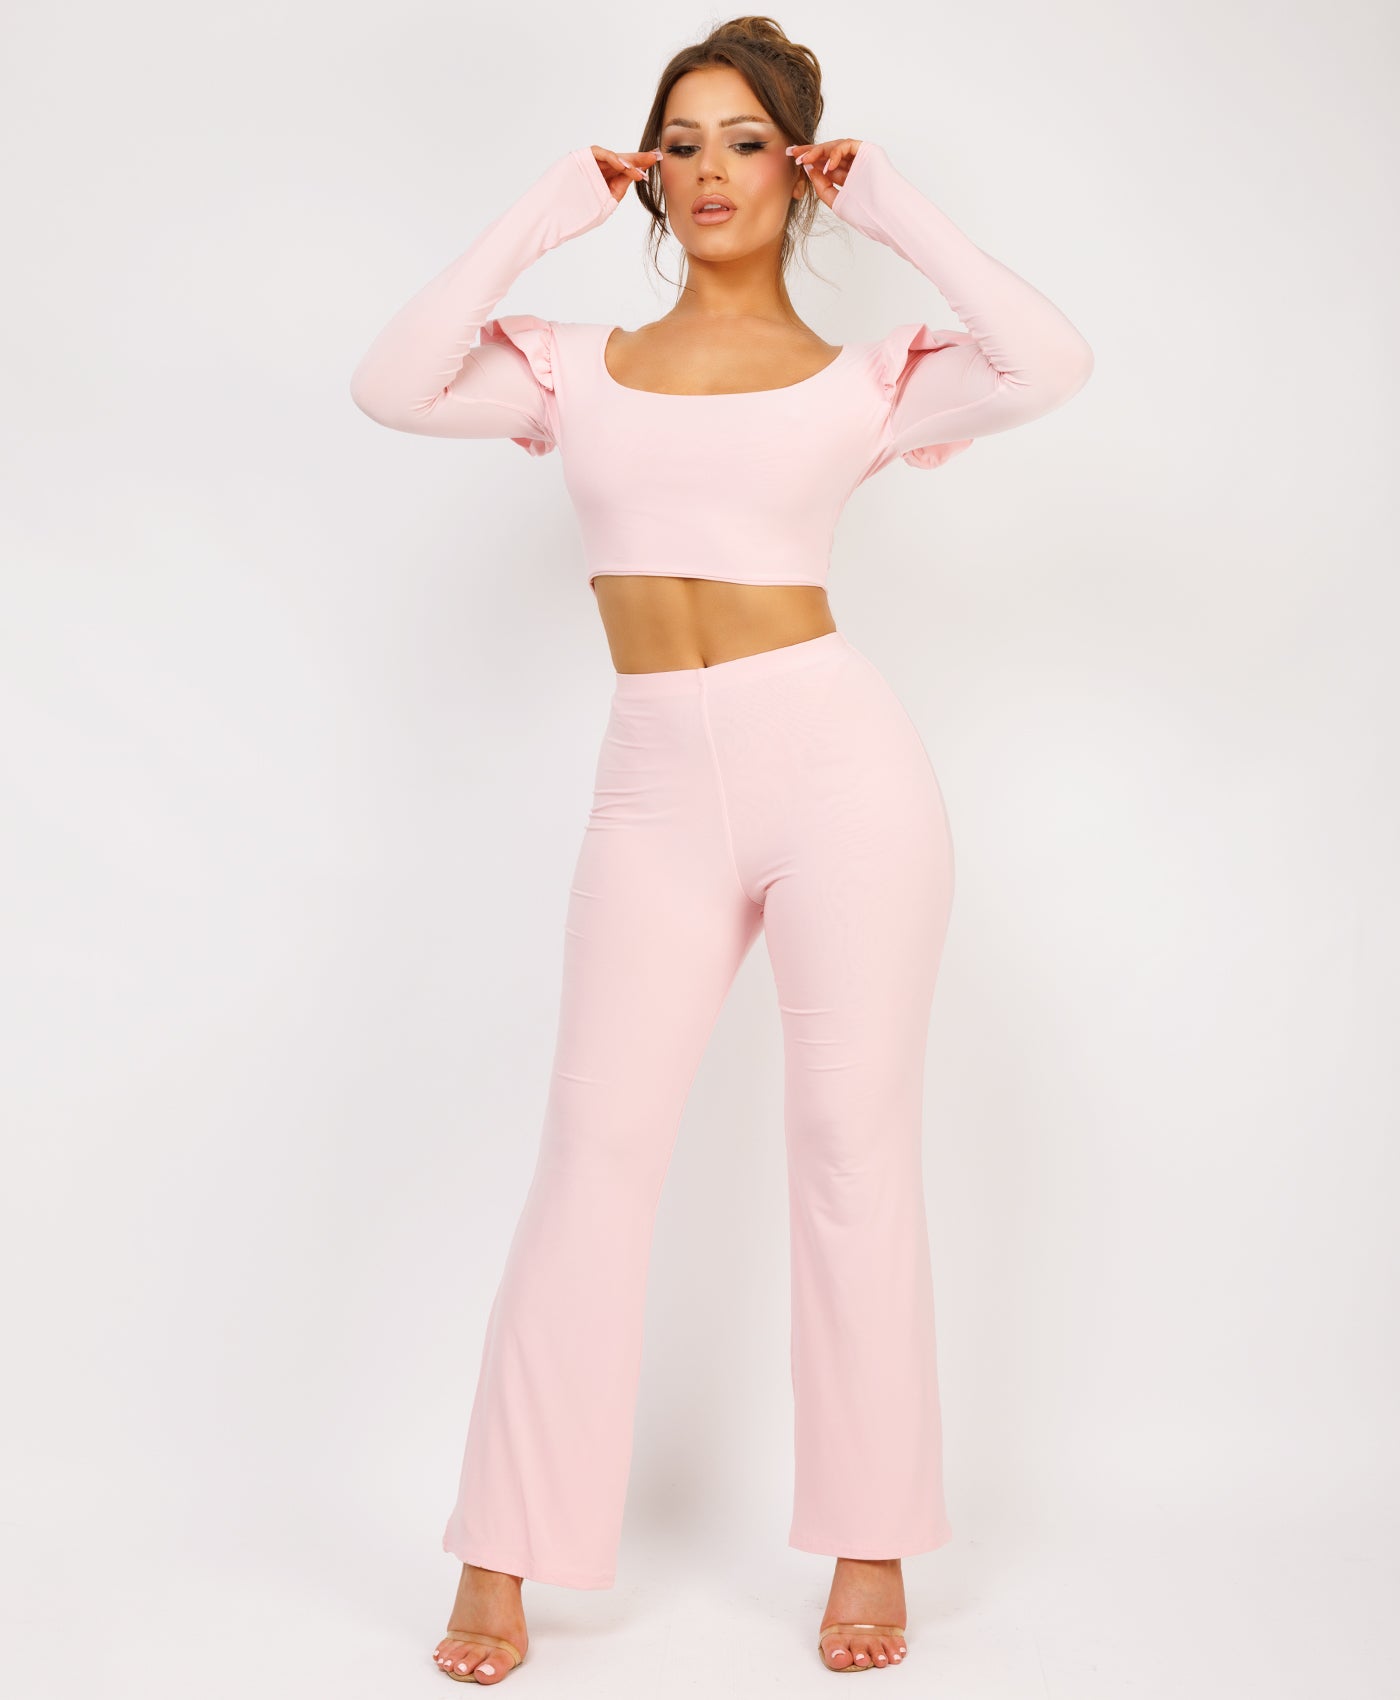 Pink Frill Shoulder Long Sleeve Slinky Top And Trousers Loungewear Set